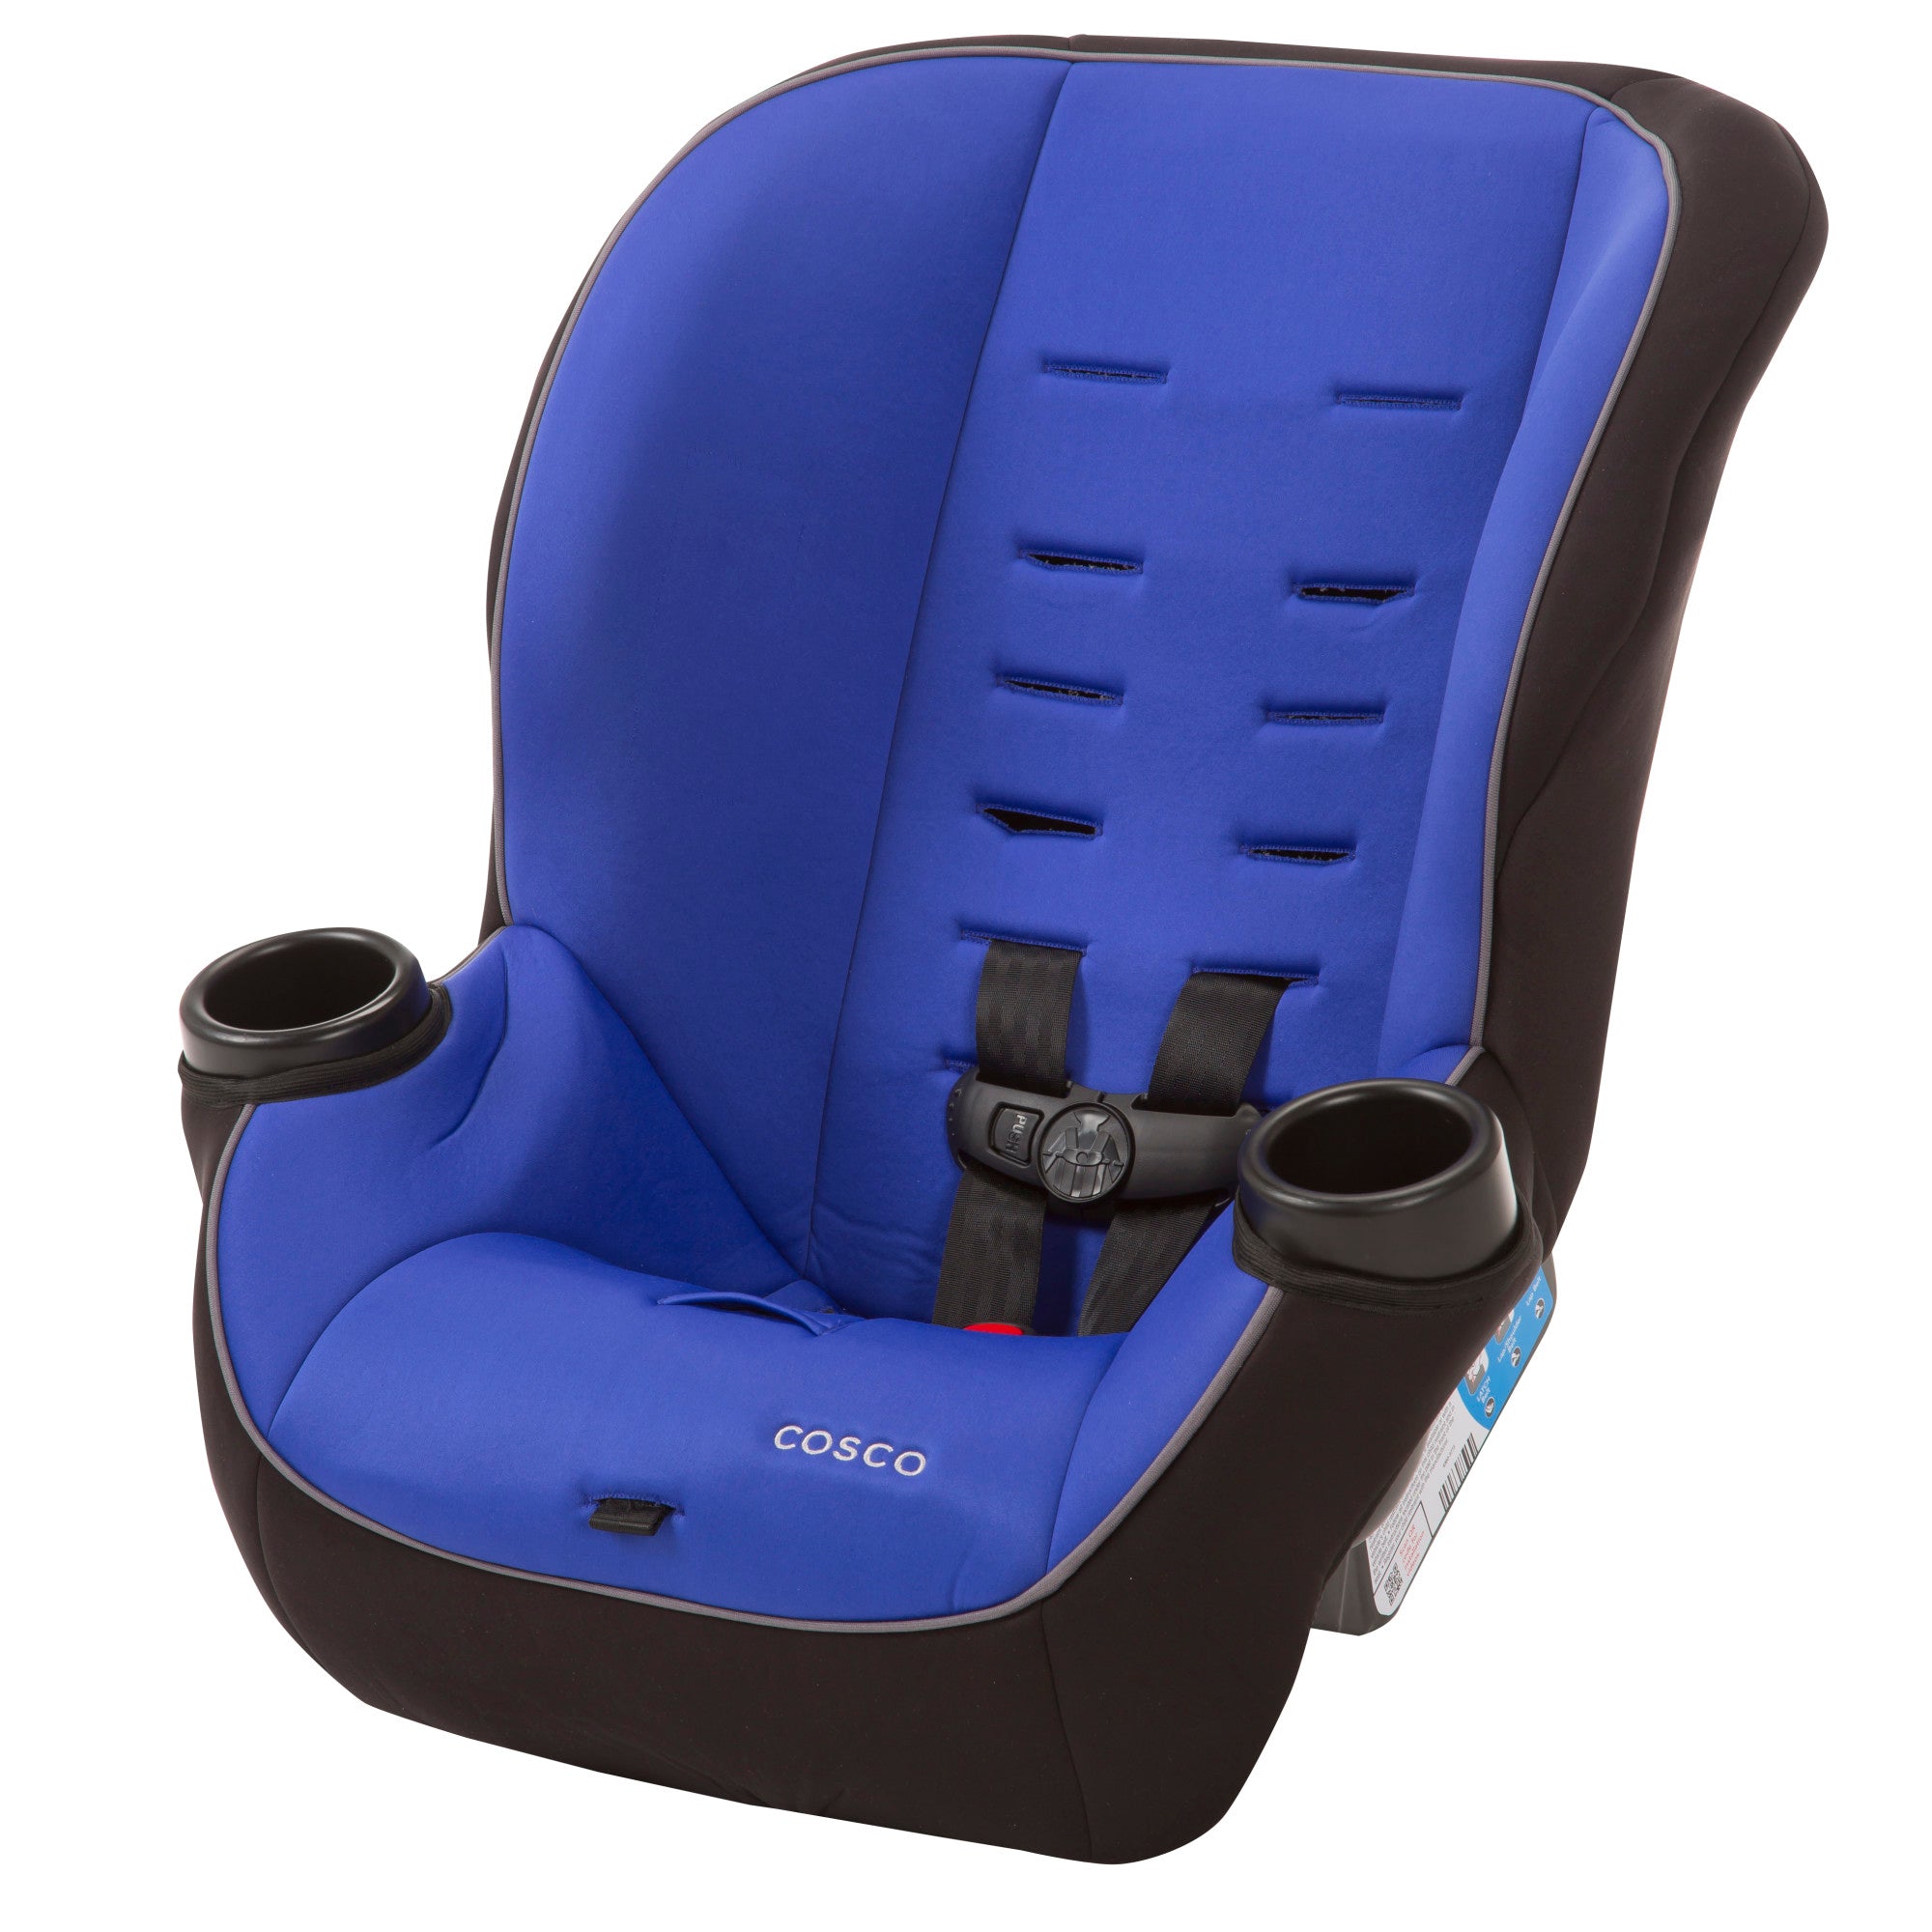 Onlook 2-in-1 Convertible Car Seat - Vibrant Blue